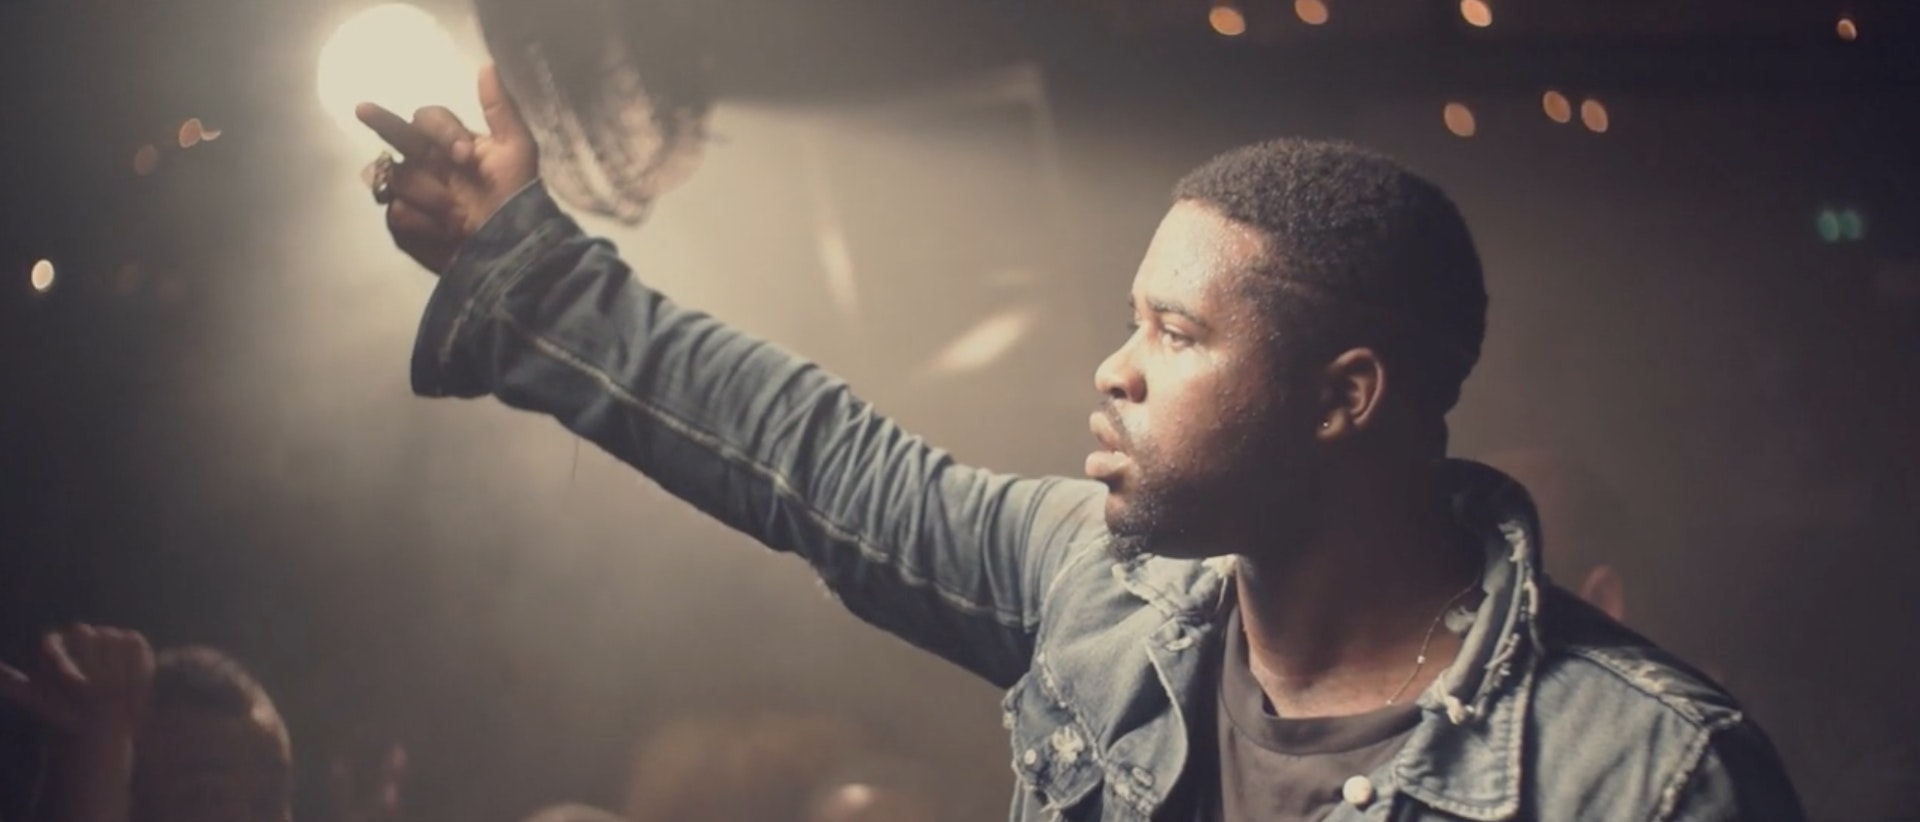 Intimate portrait of Harlem rapper A$AP Ferg shows life as seen from the stage